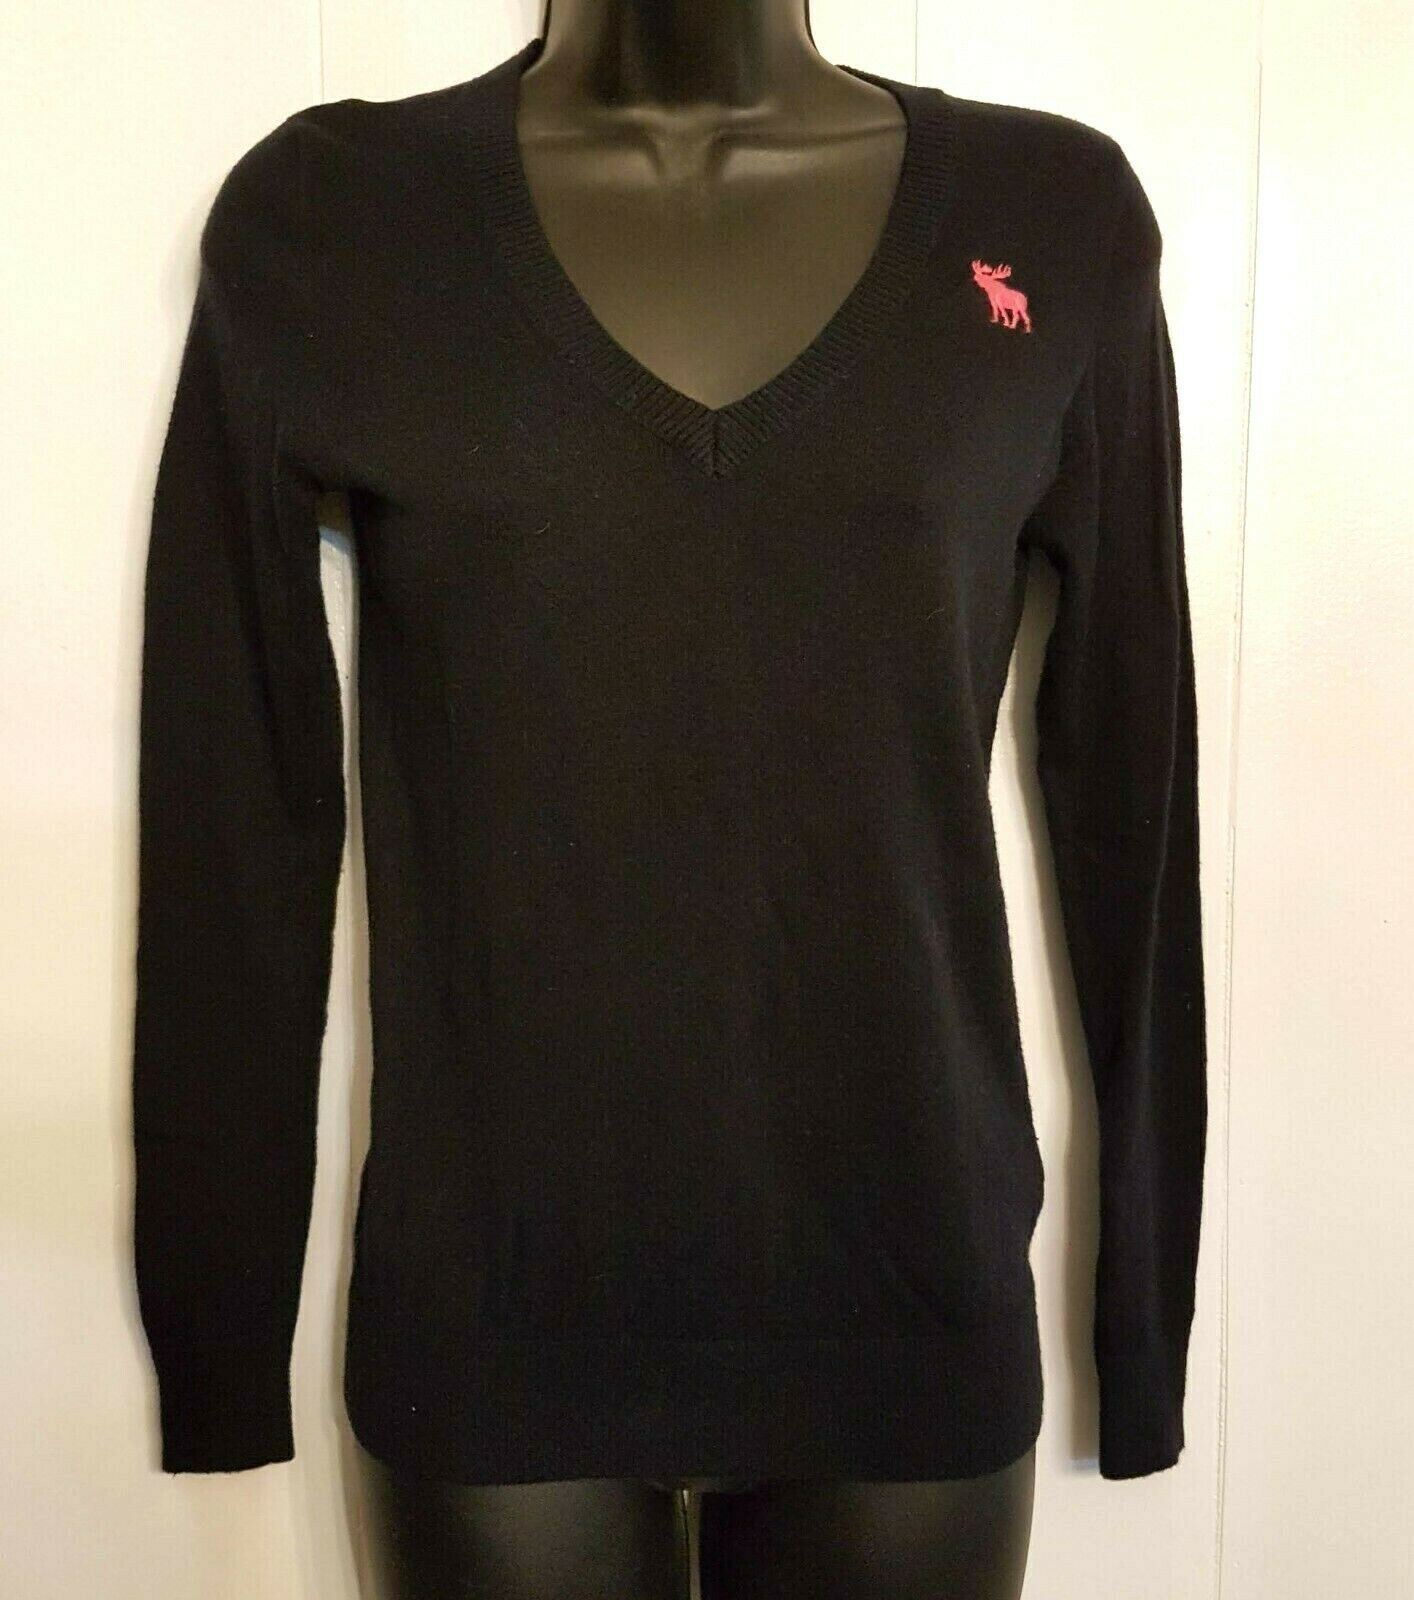 Primary image for Abercrombie Kids Sweater Black Cotton Blend Knit Top size Large Girls Pink Moose